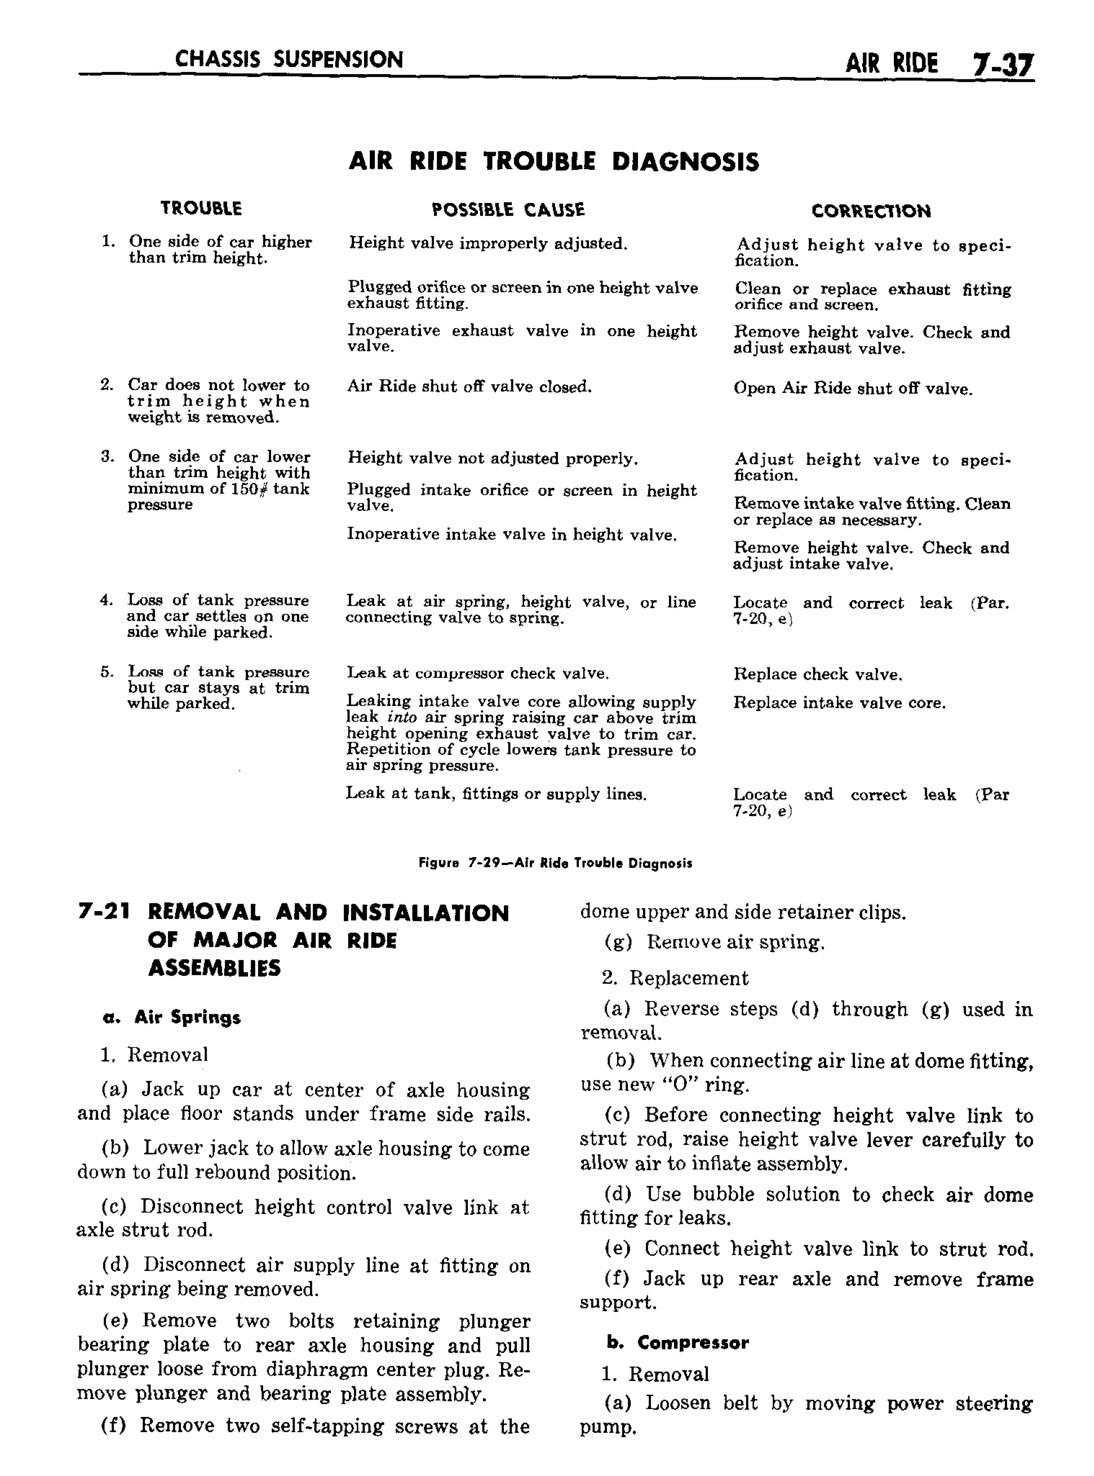 n_08 1959 Buick Shop Manual - Chassis Suspension-037-037.jpg